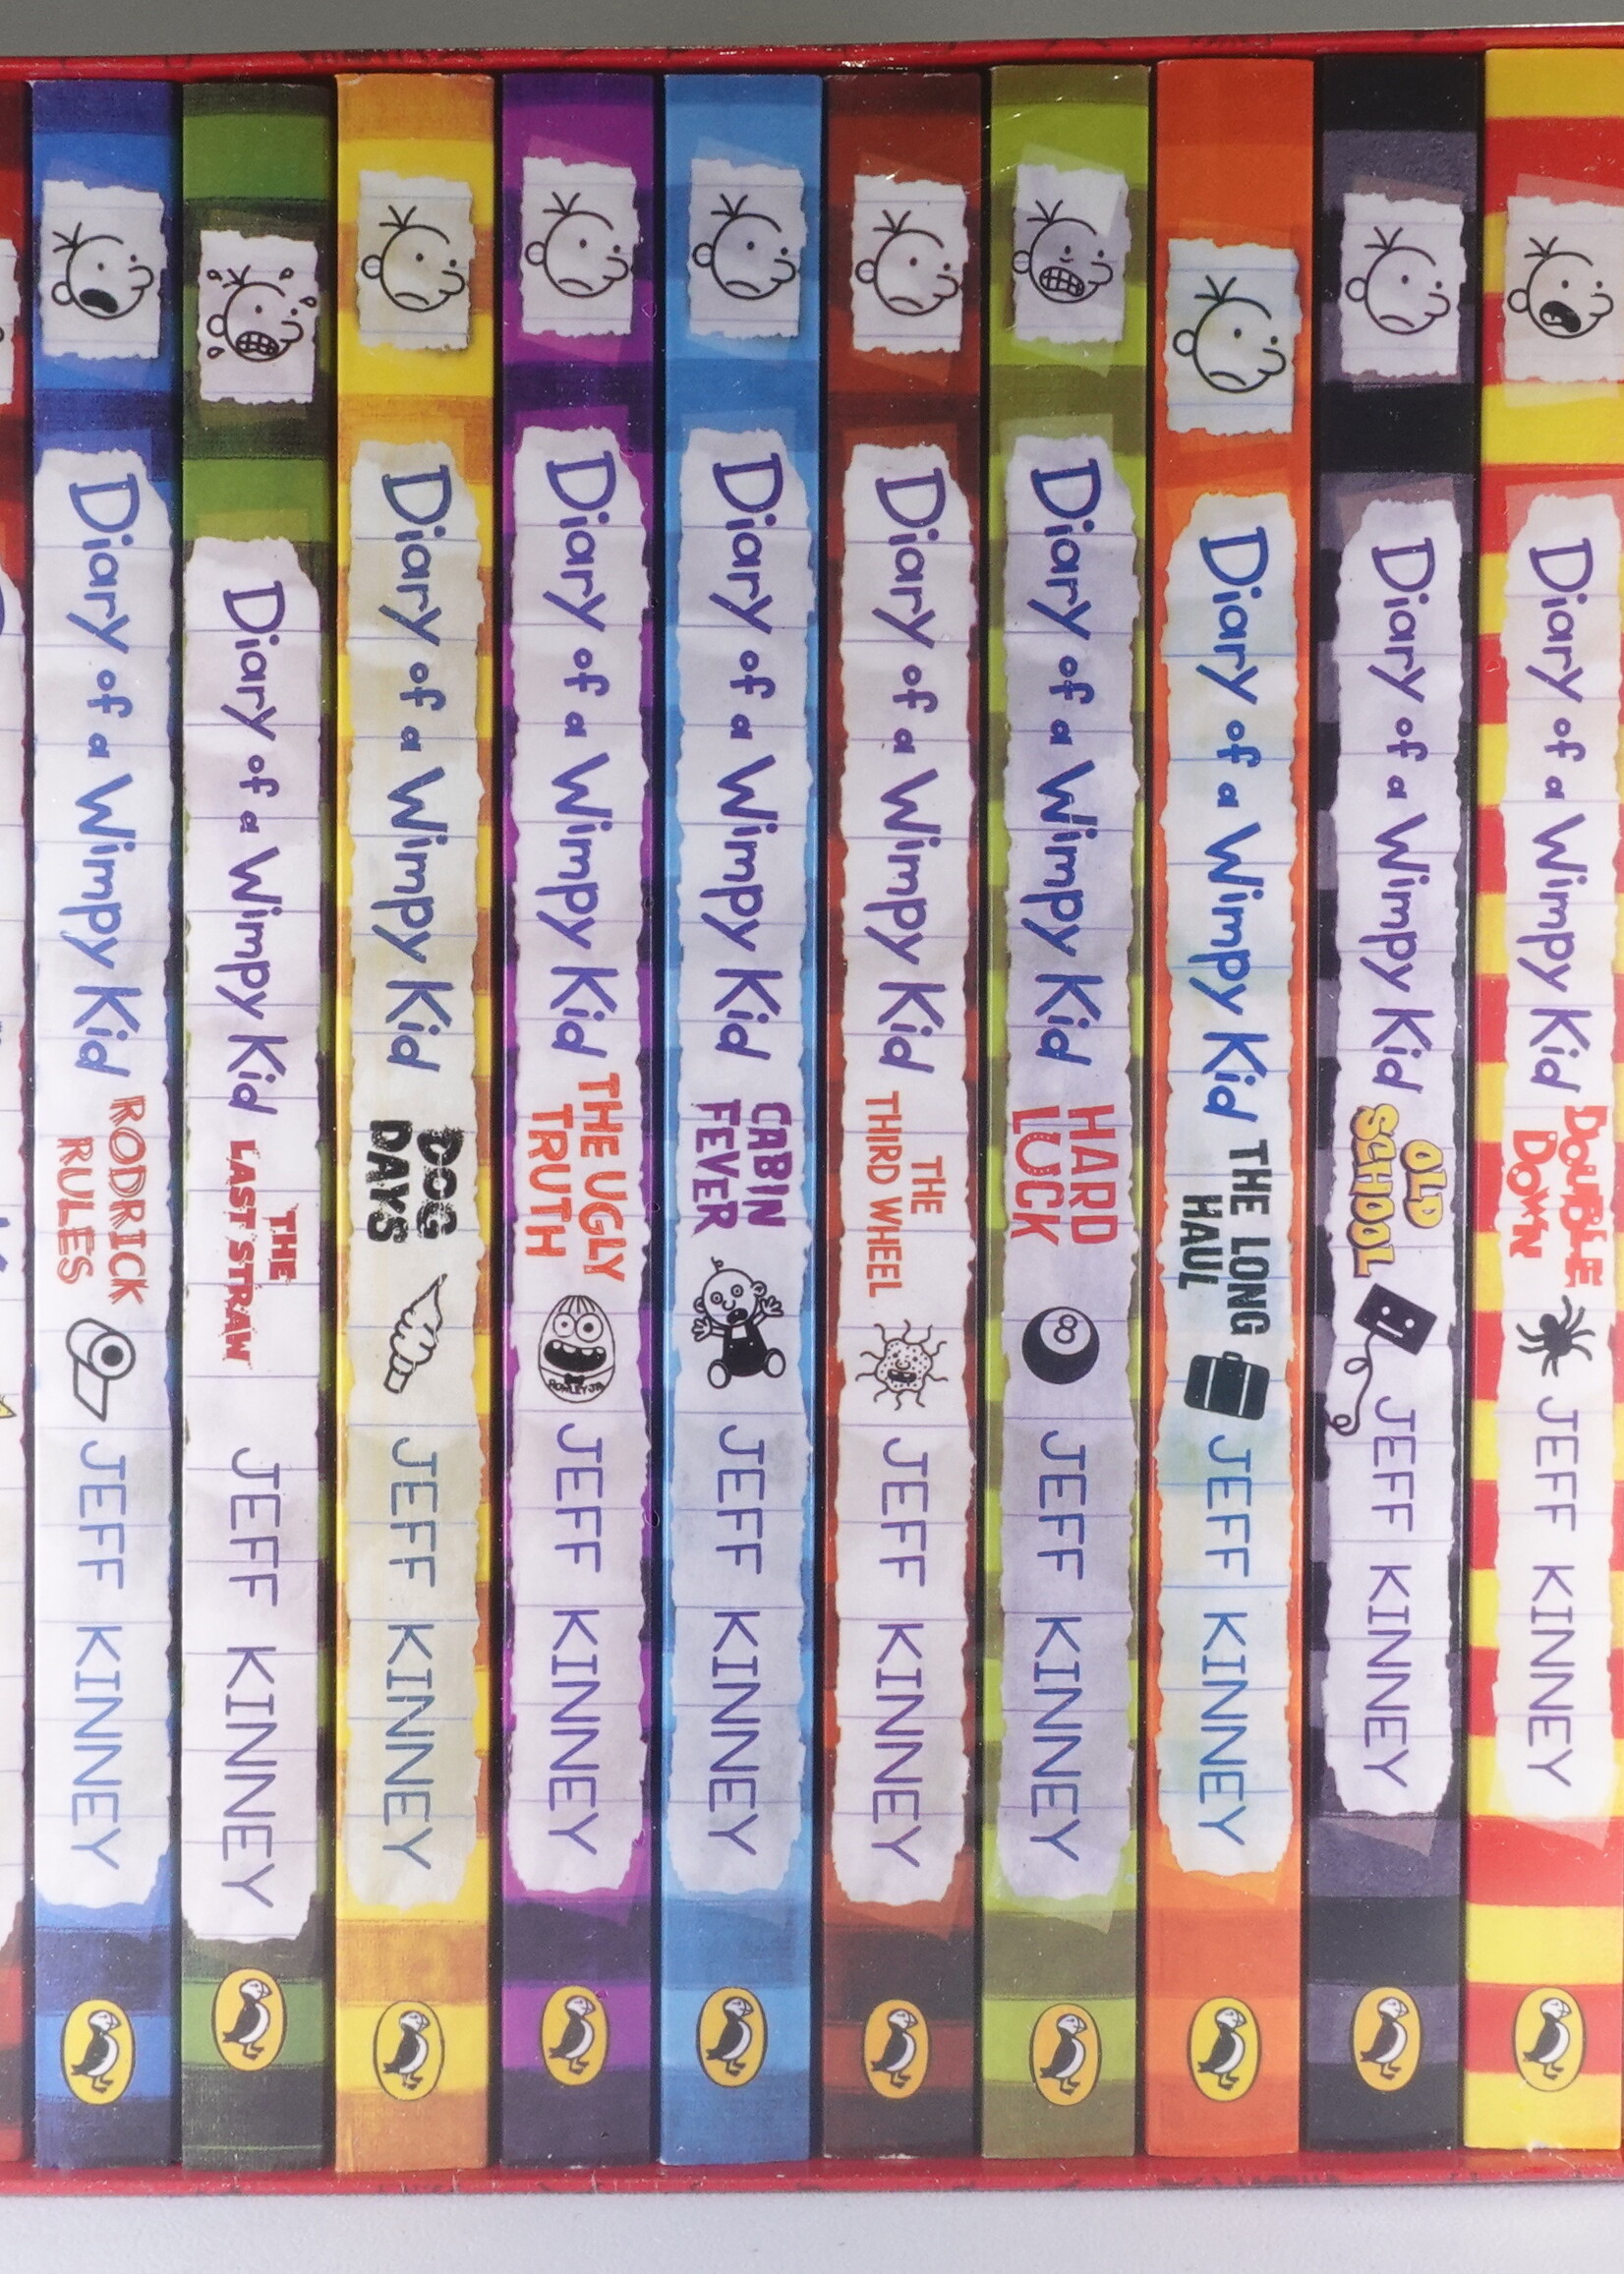 Penguin Group Diary of a Wimpy Kid: Box of Books